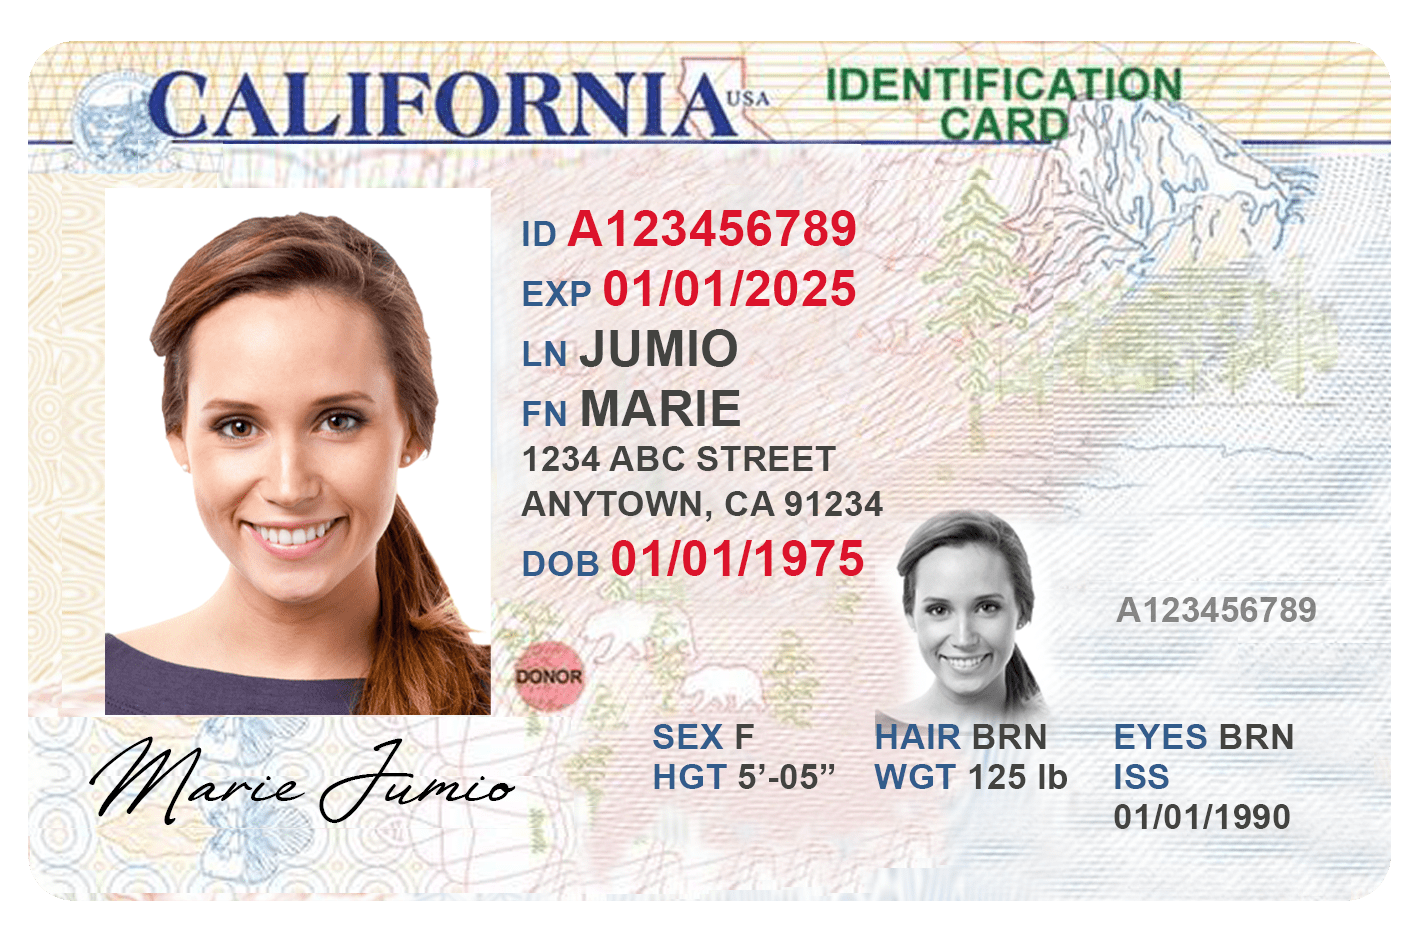 AIPowered ID and Identity Verification for the United States